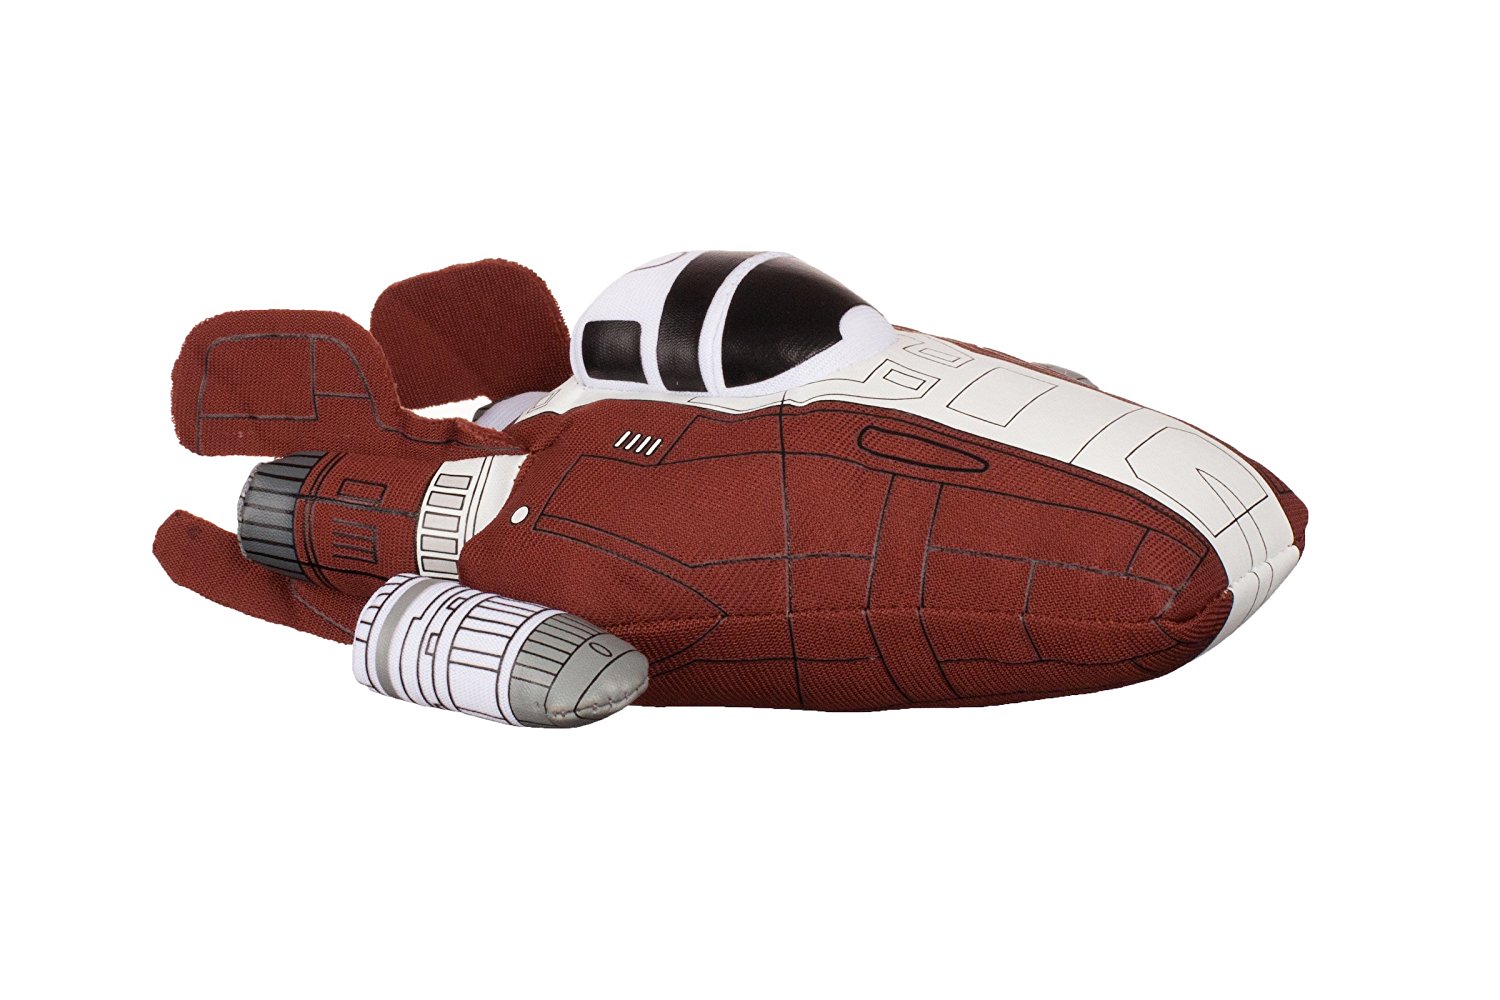 TLJ A-Wing Fighter Vehicle Plush Toy